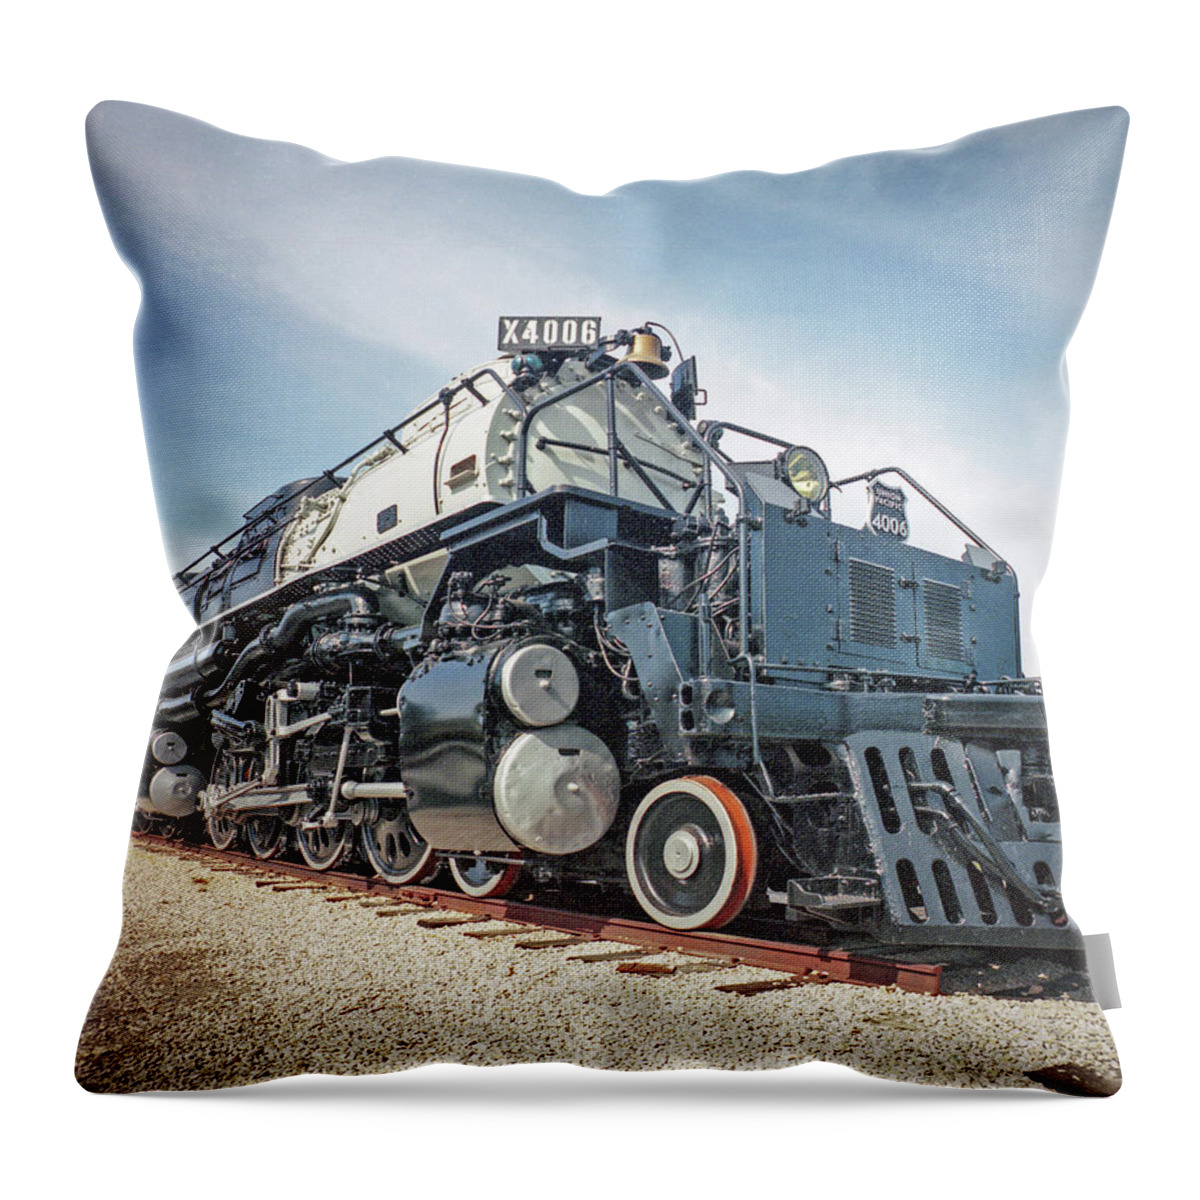 Train Throw Pillow featuring the photograph Locomotive by Jim Mathis